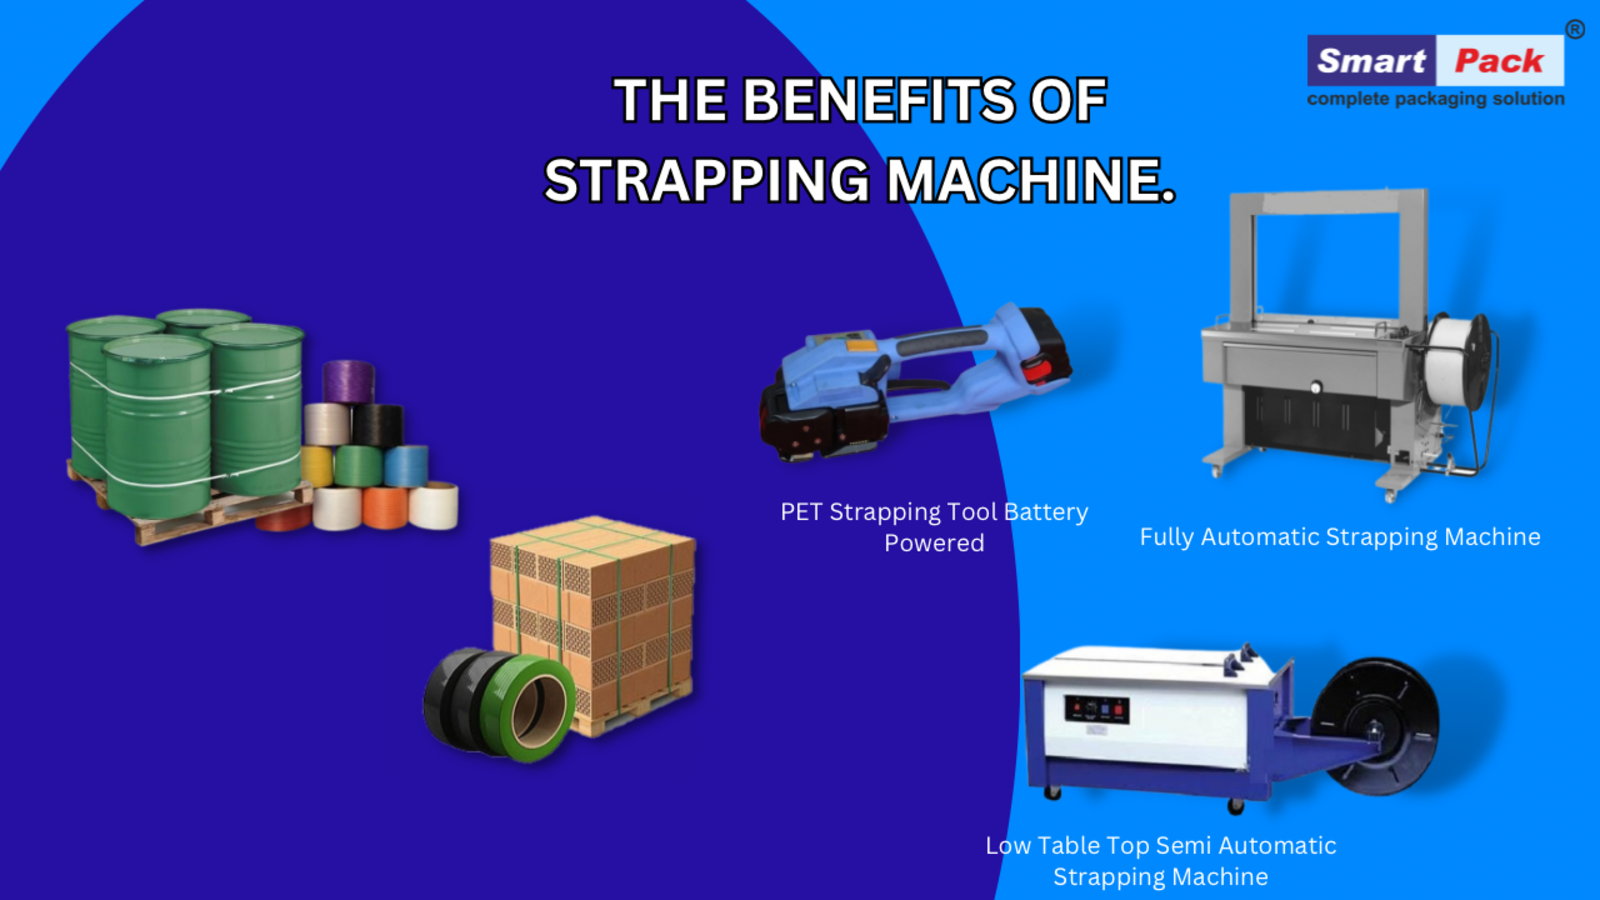 The Benefits of Strapping Machines